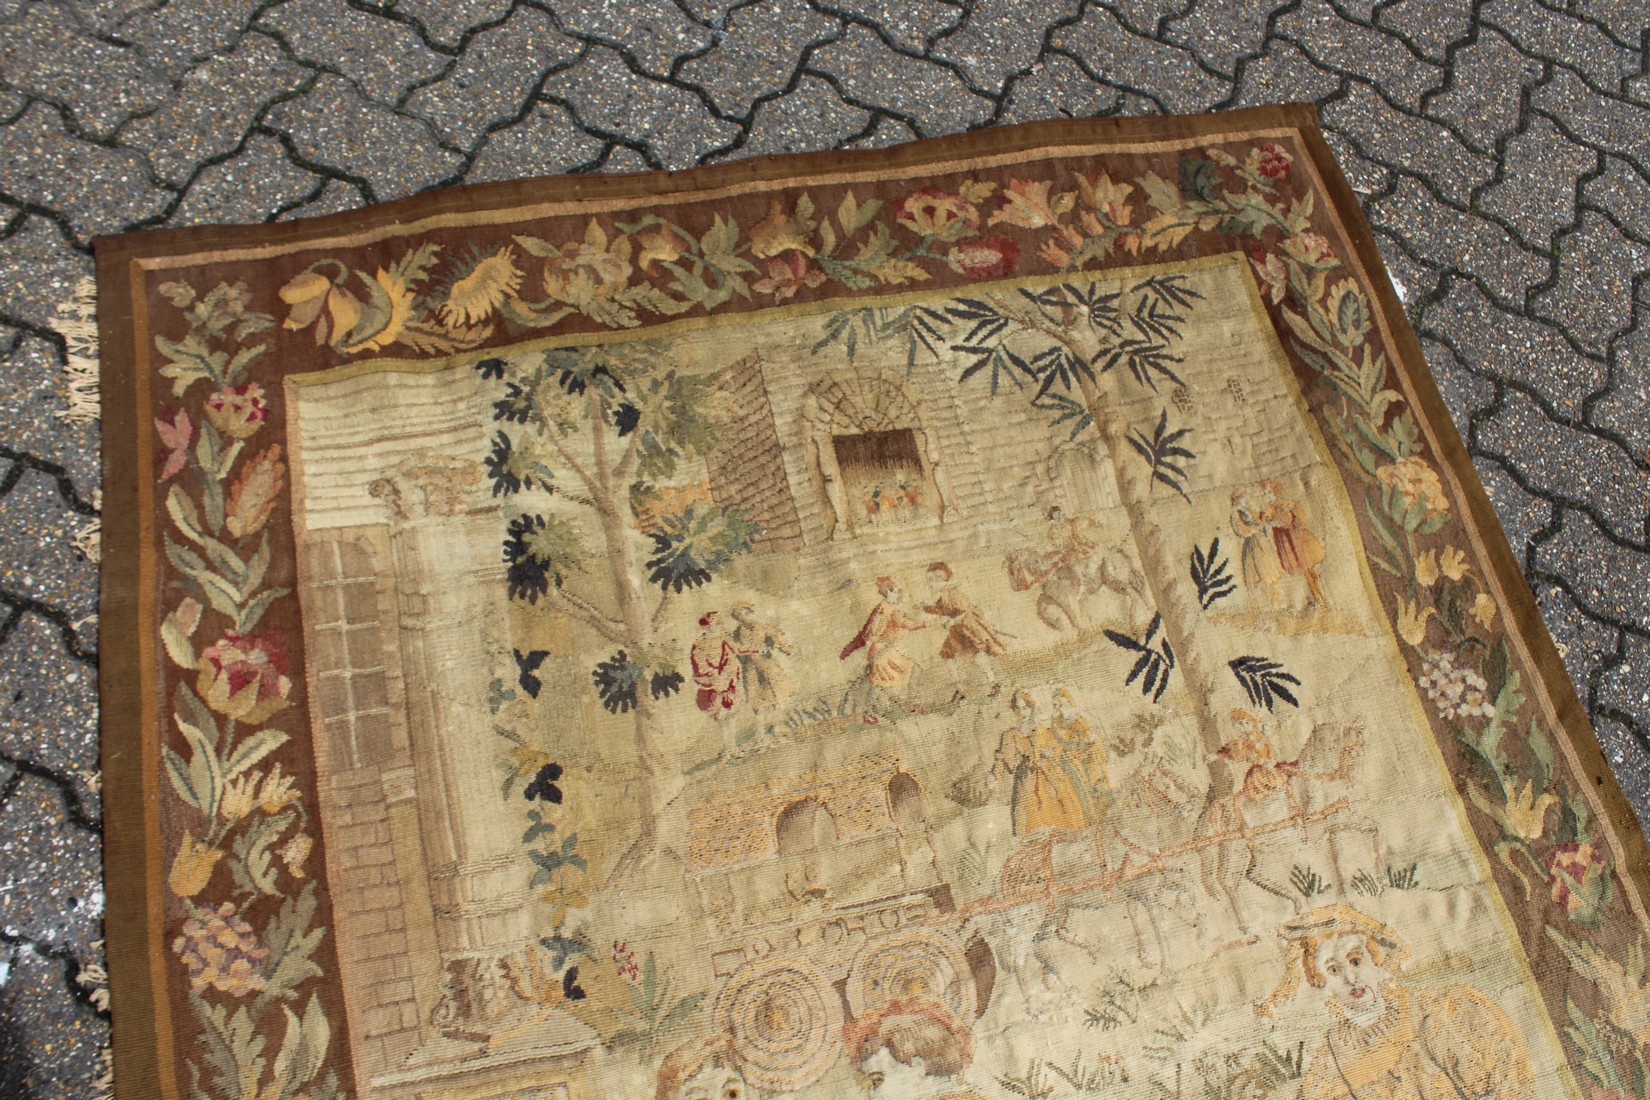 A GOOD 18TH CENTURY FRENCH TAPESTRY decorated with many figures within a floral border. 6ft high x - Image 3 of 9